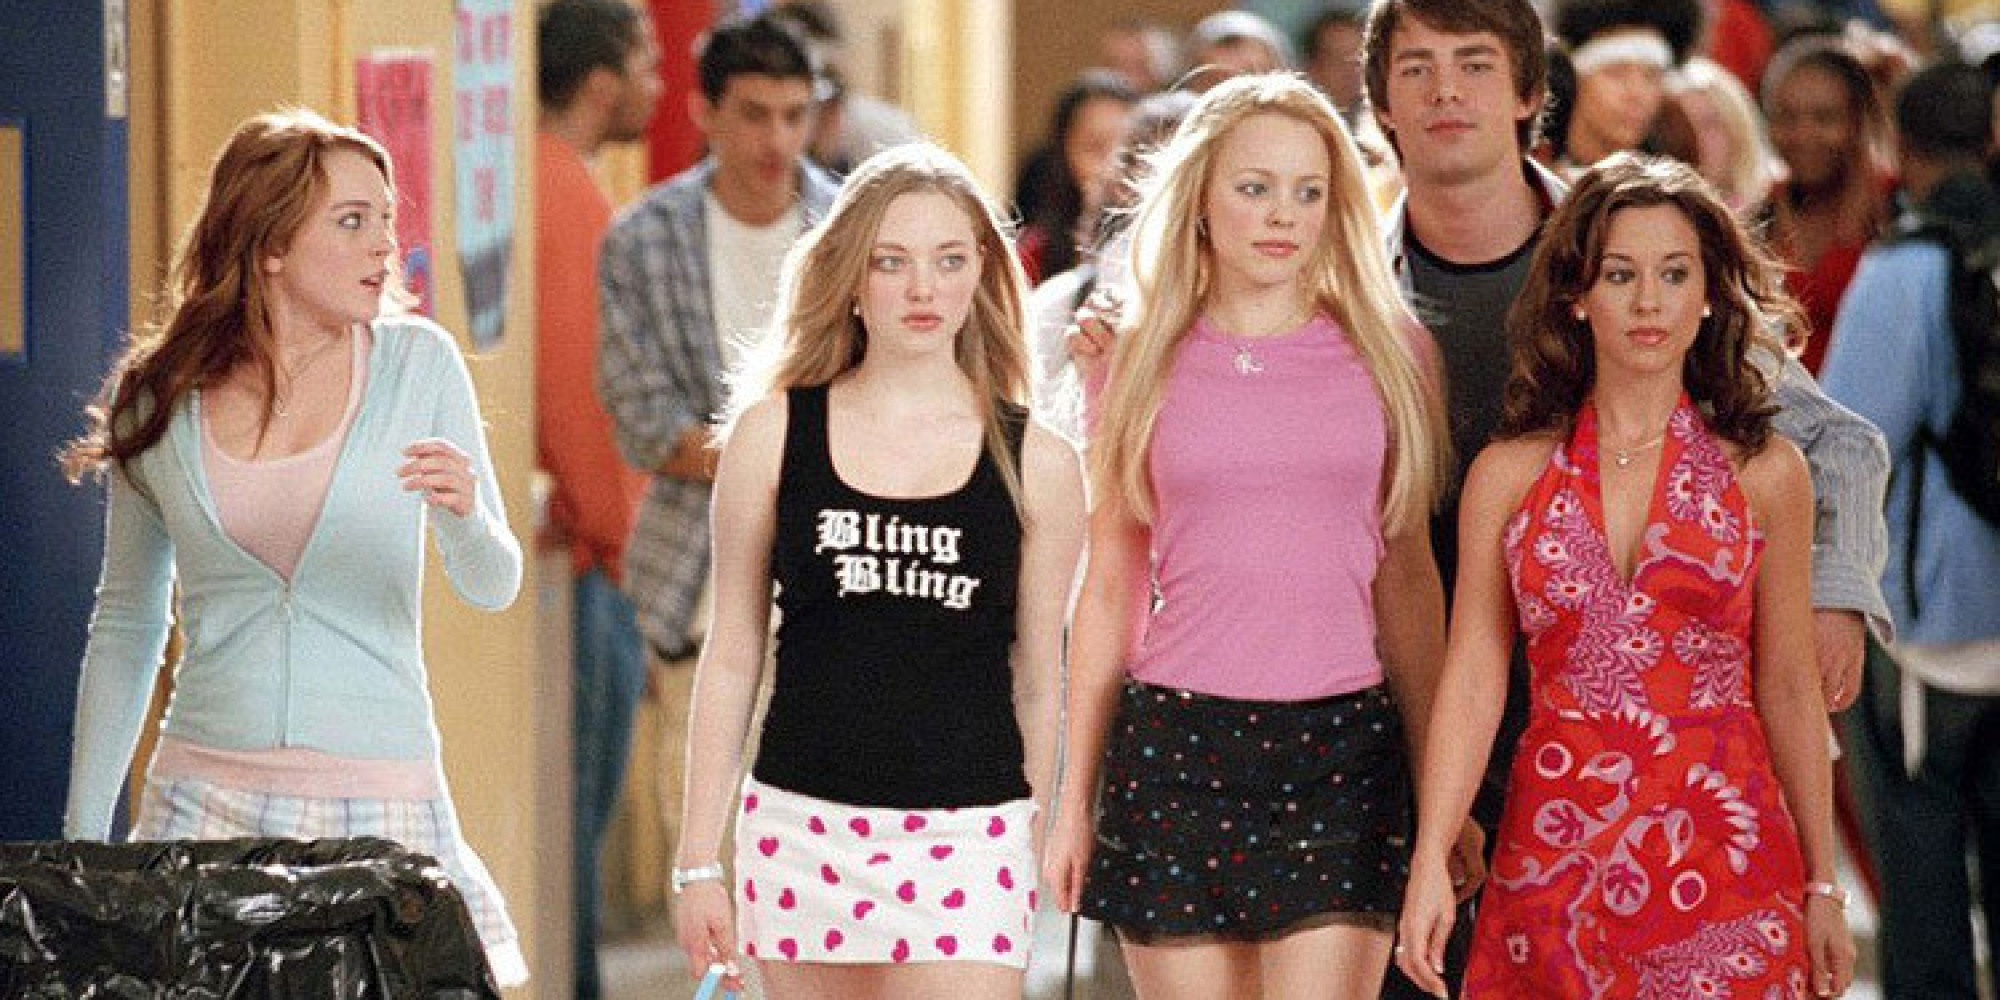 5 Things We Learned From The 'Mean Girls' Reunion | HuffPost